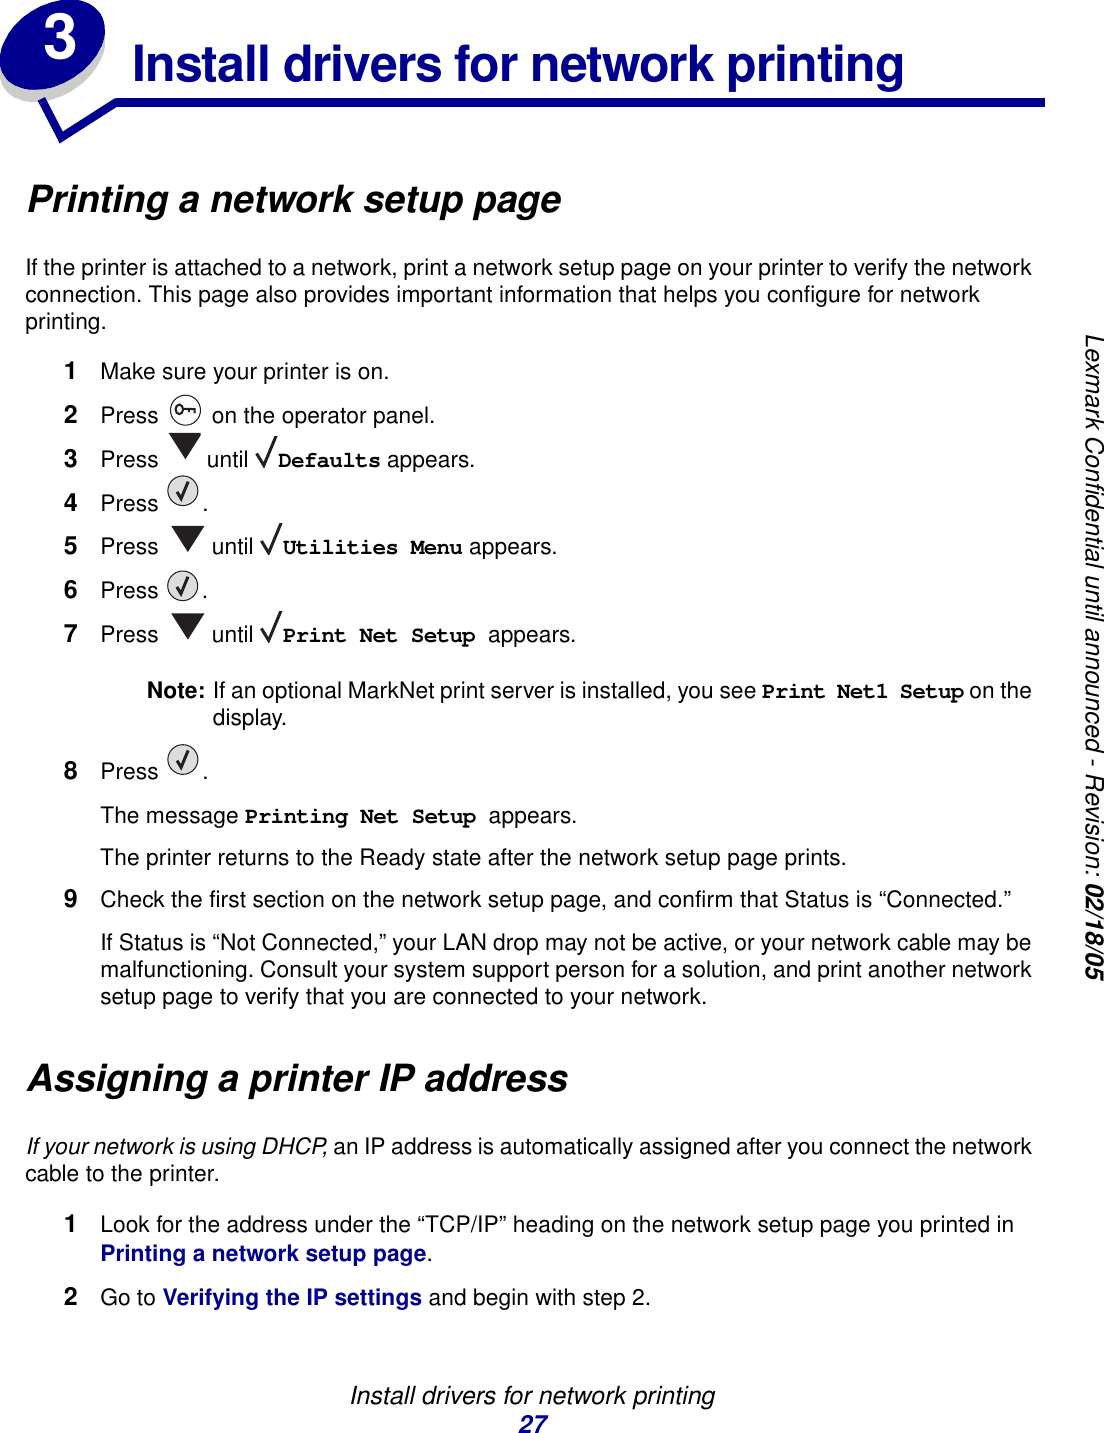 Install drivers for network printing27Lexmark Confidential until announced - Revision: 02/18/053Install drivers for network printingPrinting a network setup pageIf the printer is attached to a network, print a network setup page on your printer to verify the network connection. This page also provides important information that helps you configure for network printing. 1Make sure your printer is on.2Press   on the operator panel.3Press  until Defaults appears.4Press .5Press  until Utilities Menu appears.6Press .7Press  until Print Net Setup appears.Note: If an optional MarkNet print server is installed, you see Print Net1 Setup on the display.8Press .The message Printing Net Setup appears.The printer returns to the Ready state after the network setup page prints.9Check the first section on the network setup page, and confirm that Status is “Connected.”If Status is “Not Connected,” your LAN drop may not be active, or your network cable may be malfunctioning. Consult your system support person for a solution, and print another network setup page to verify that you are connected to your network.Assigning a printer IP addressIf your network is using DHCP, an IP address is automatically assigned after you connect the network cable to the printer.1Look for the address under the “TCP/IP” heading on the network setup page you printed in Printing a network setup page.2Go to Verifying the IP settings and begin with step 2.